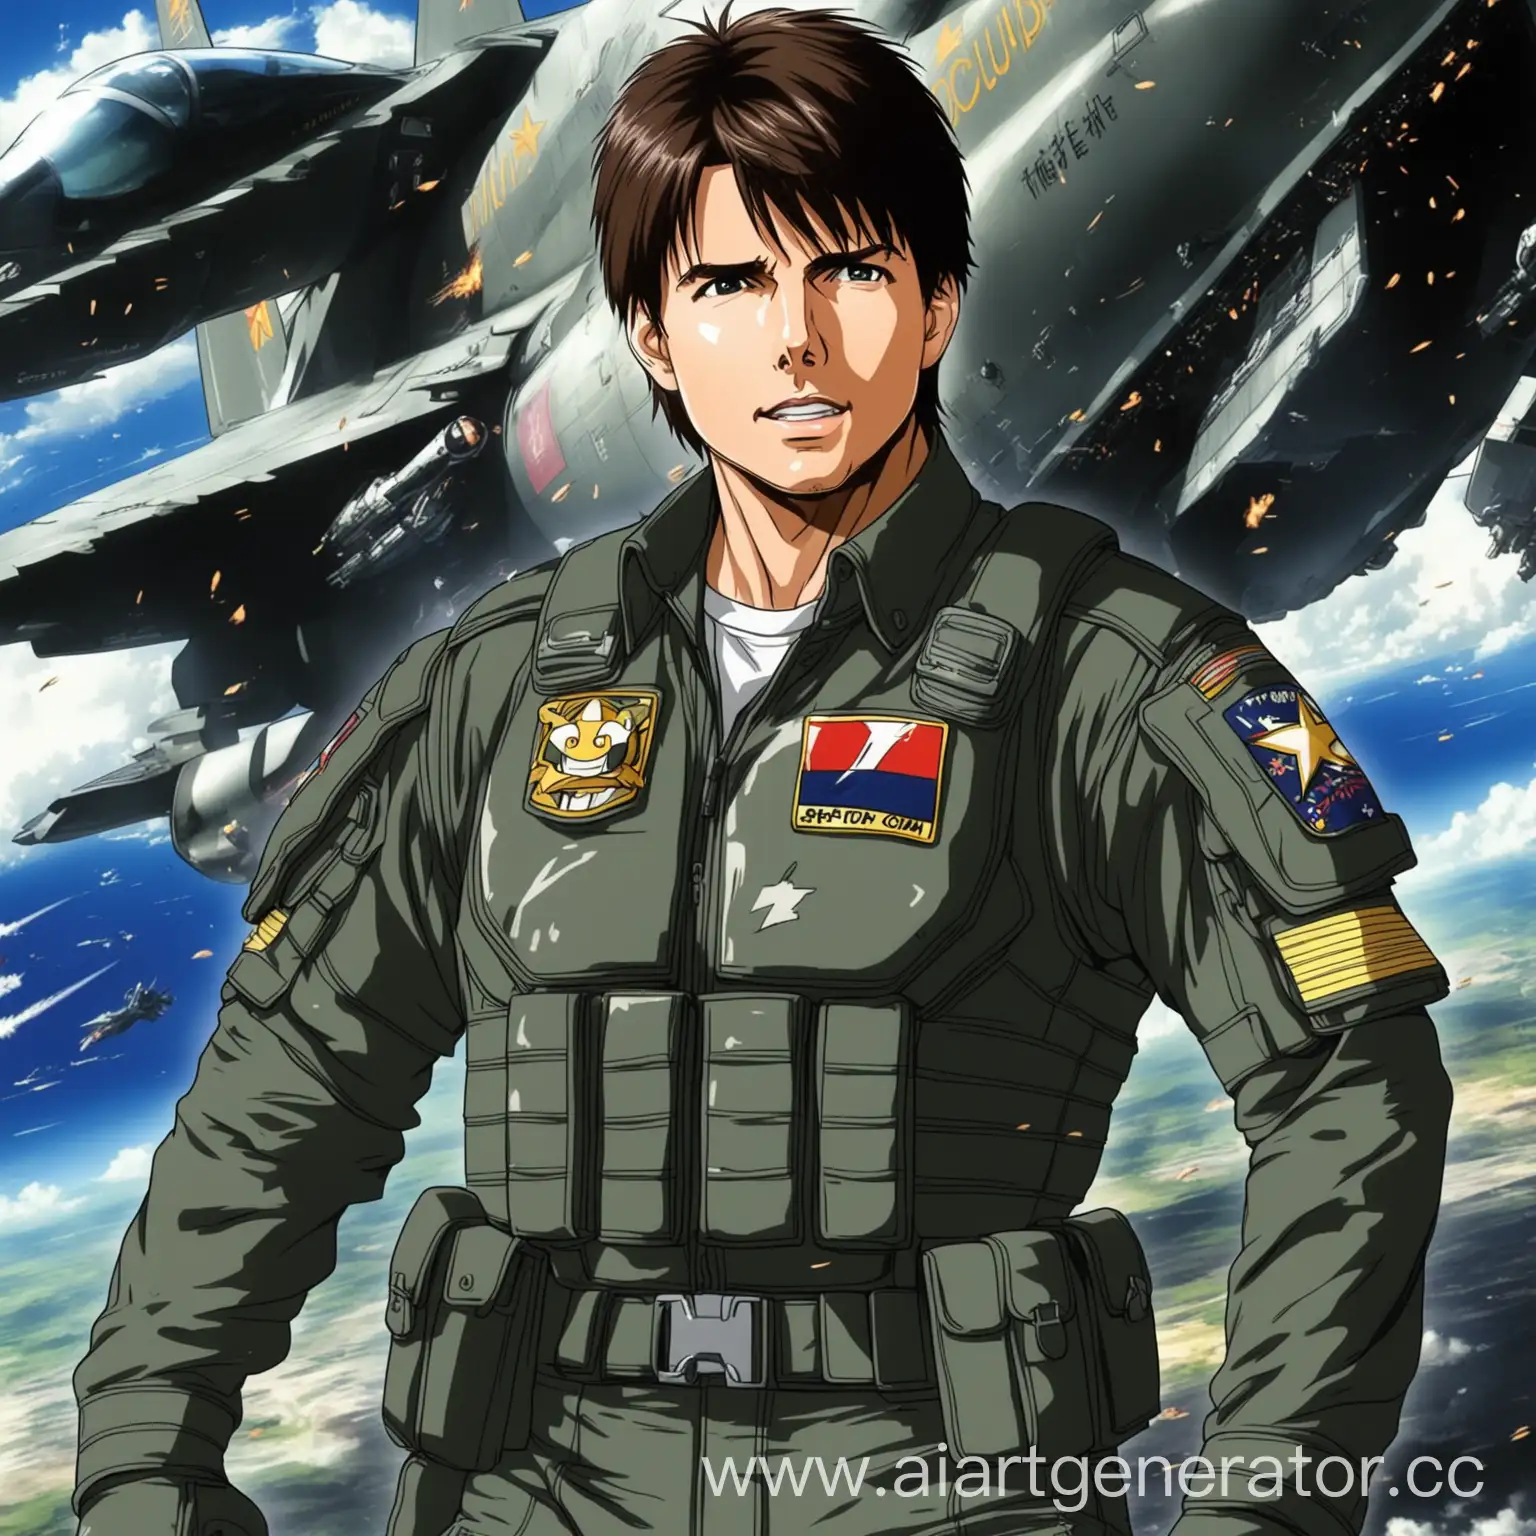 Anime-Tom-Cruise-Cosplay-Vibrant-Portrayal-of-the-Hollywood-Star-in-Japanese-Animation-Style